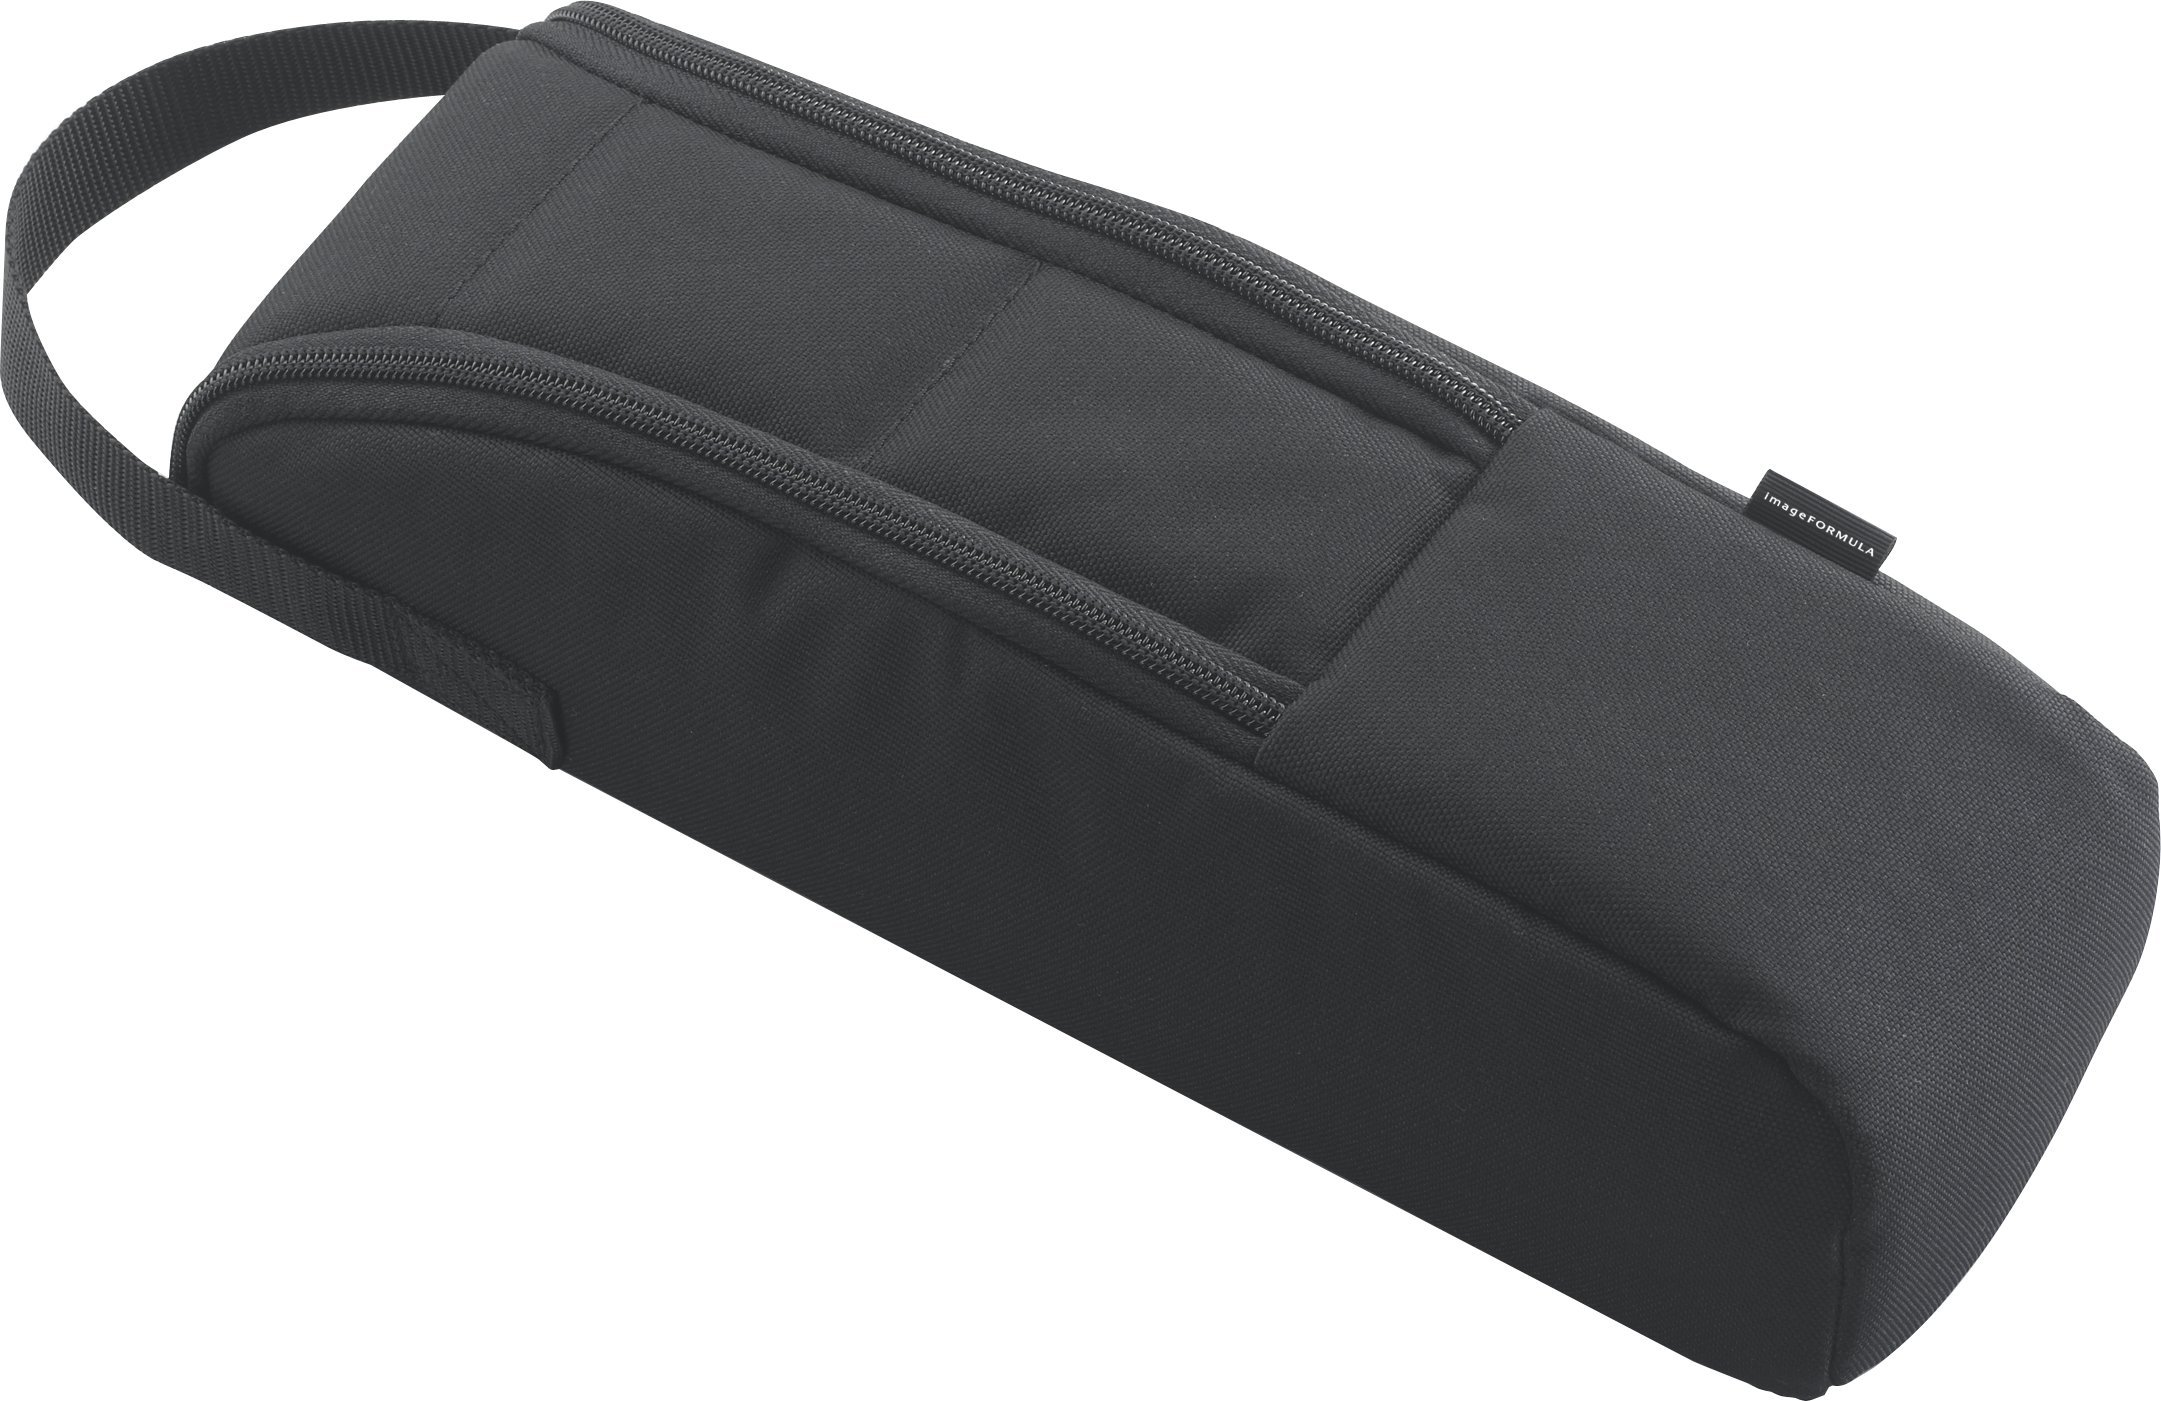 P-150 CARRYING CASE